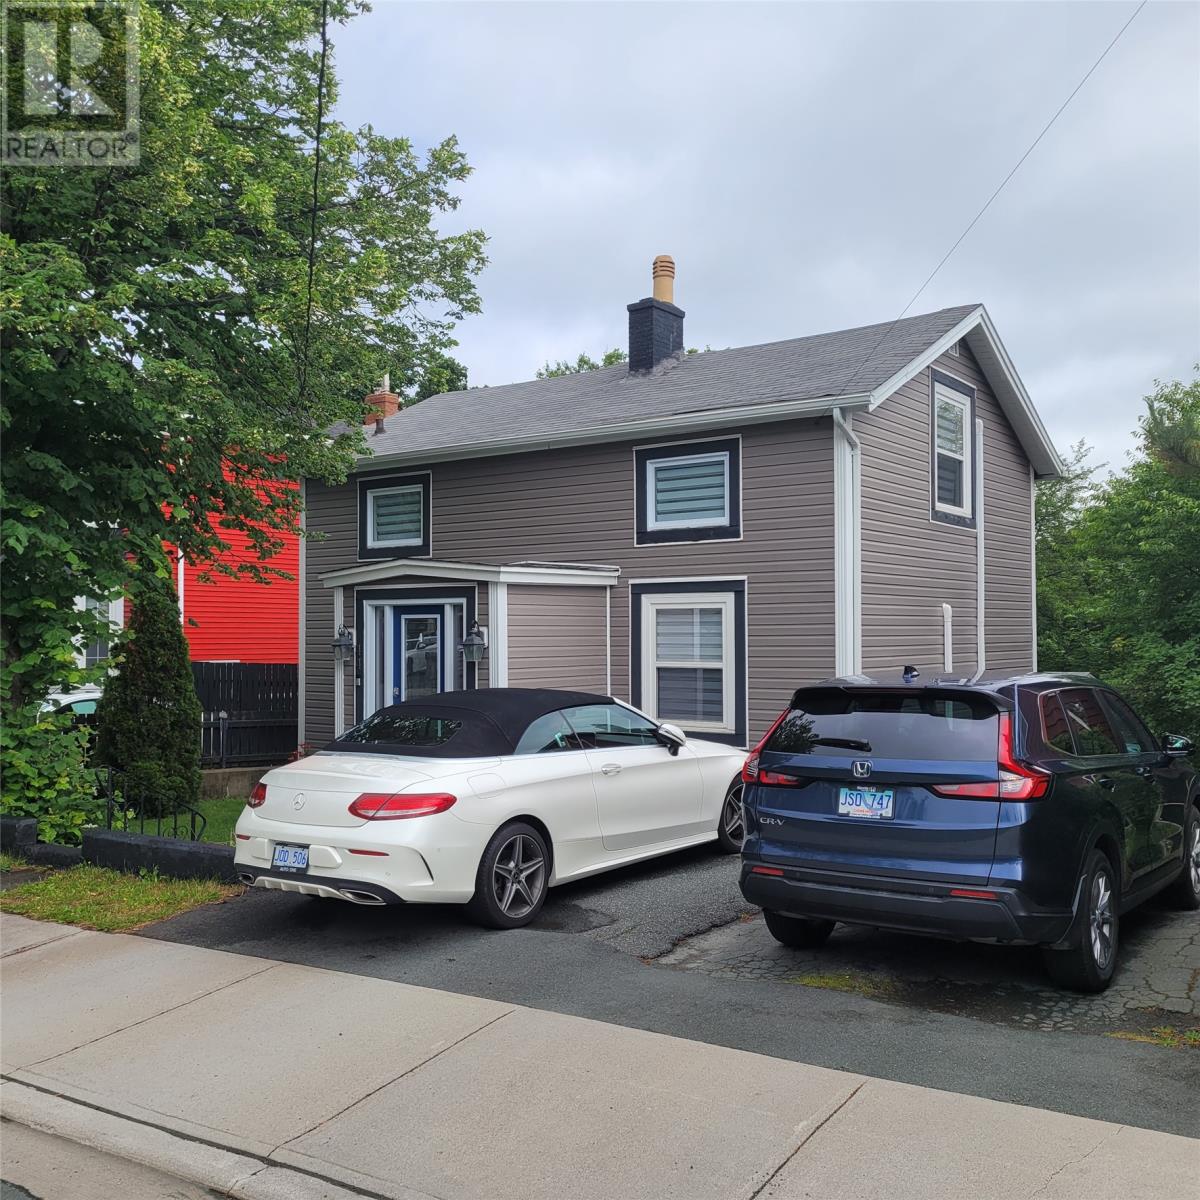 44 PORTUGAL COVE Road, ST. JOHN'S, A1B2L9, 3 Bedrooms Bedrooms, ,2 BathroomsBathrooms,Single Family,For rent,PORTUGAL COVE,1269970